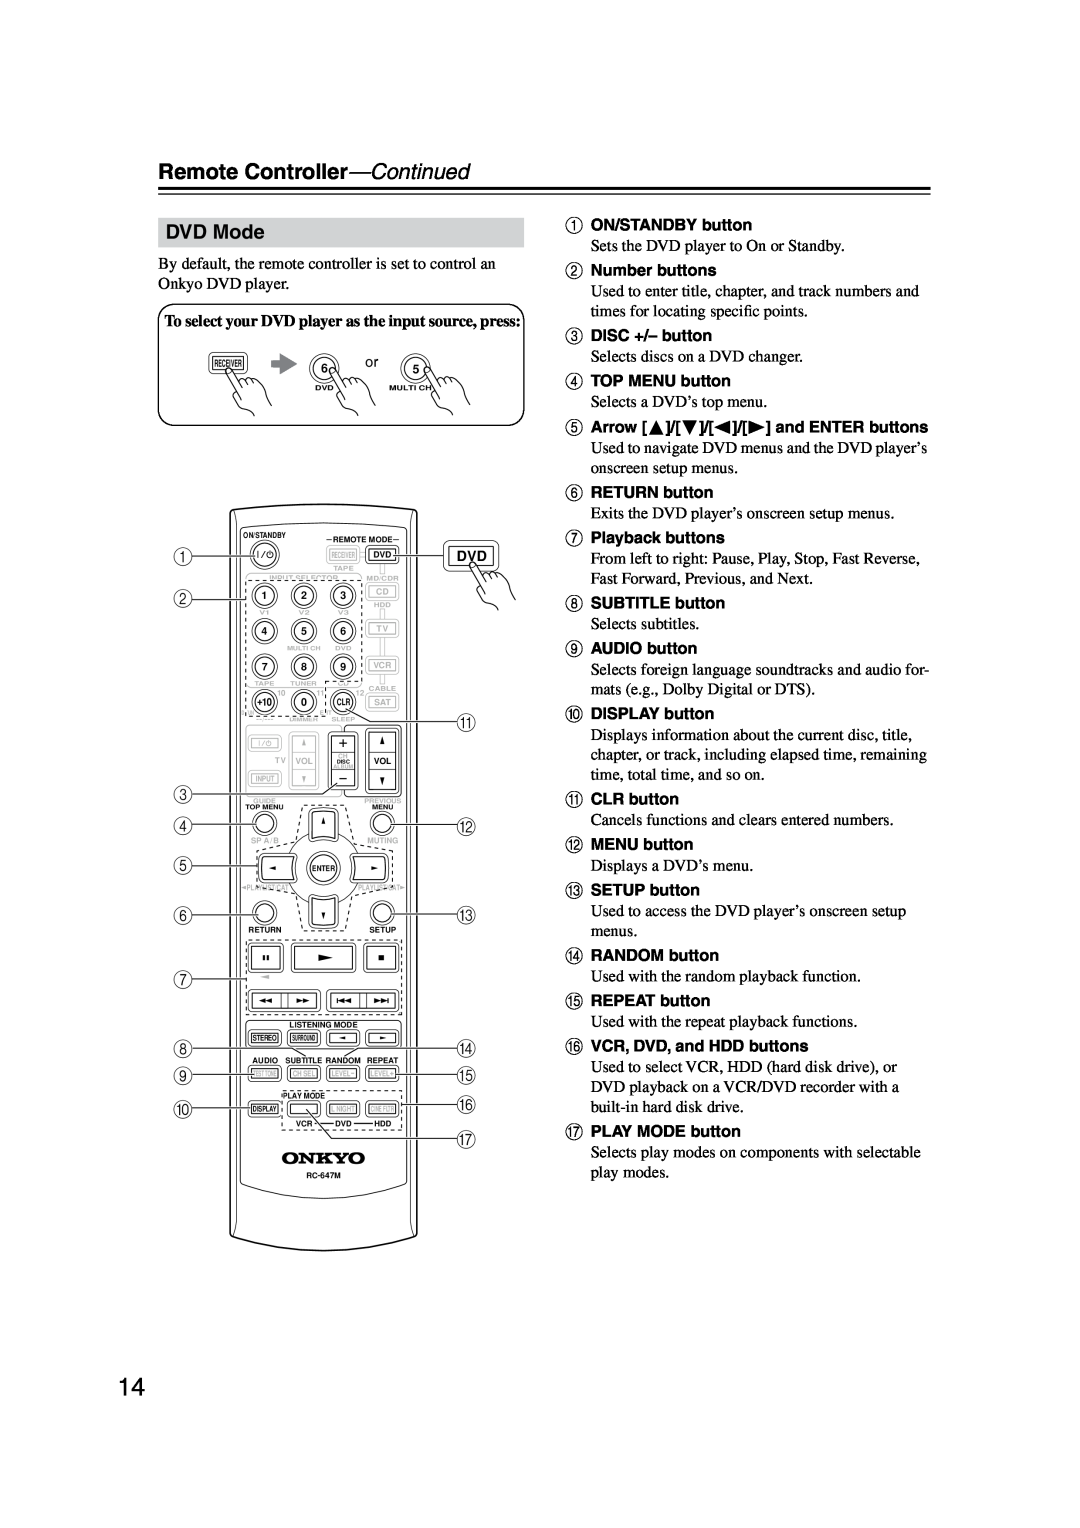 Onkyo TX-SR574 instruction manual DVD Mode, 1 2 3 4 5 6 7 8 9 J, Remote Controller-Continued 